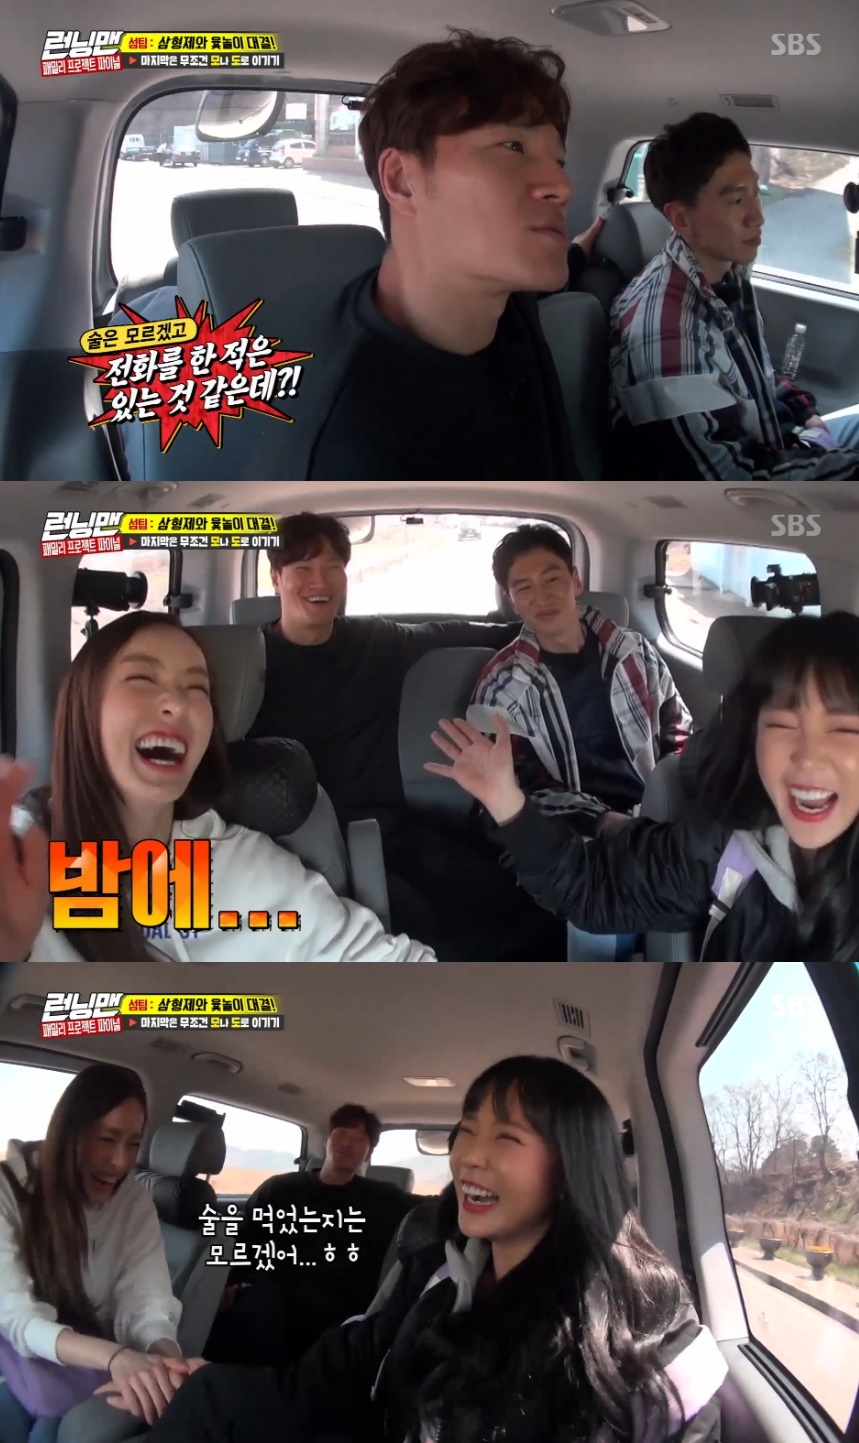 Kim Jong-kook revealed that Hong Jin-young once called me at night.Singer Kim Jong-kook, actor Lee Kwang-soo, singer Hong Jin-young, and actor Idahi played an active role as an island team member on SBS Good Sunday - Running Man broadcast on May 13th.When I came out of Running Man, Lee Kwang-soo said that I had been drinking and called Kim Jong-kook, but I did not receive it, Hong Jin-young said.Then he asked Kim Jong-kook, Have I ever been drinking and calling you? I never called after drinking, did I?Kim Jong-kook said, I think you have called me at night. Disclosure embarrassed Hong Jin-young.Kim Jong-kook added a laugh, saying, Ive called and I dont know if Ive had a drink.hwang hye-jin